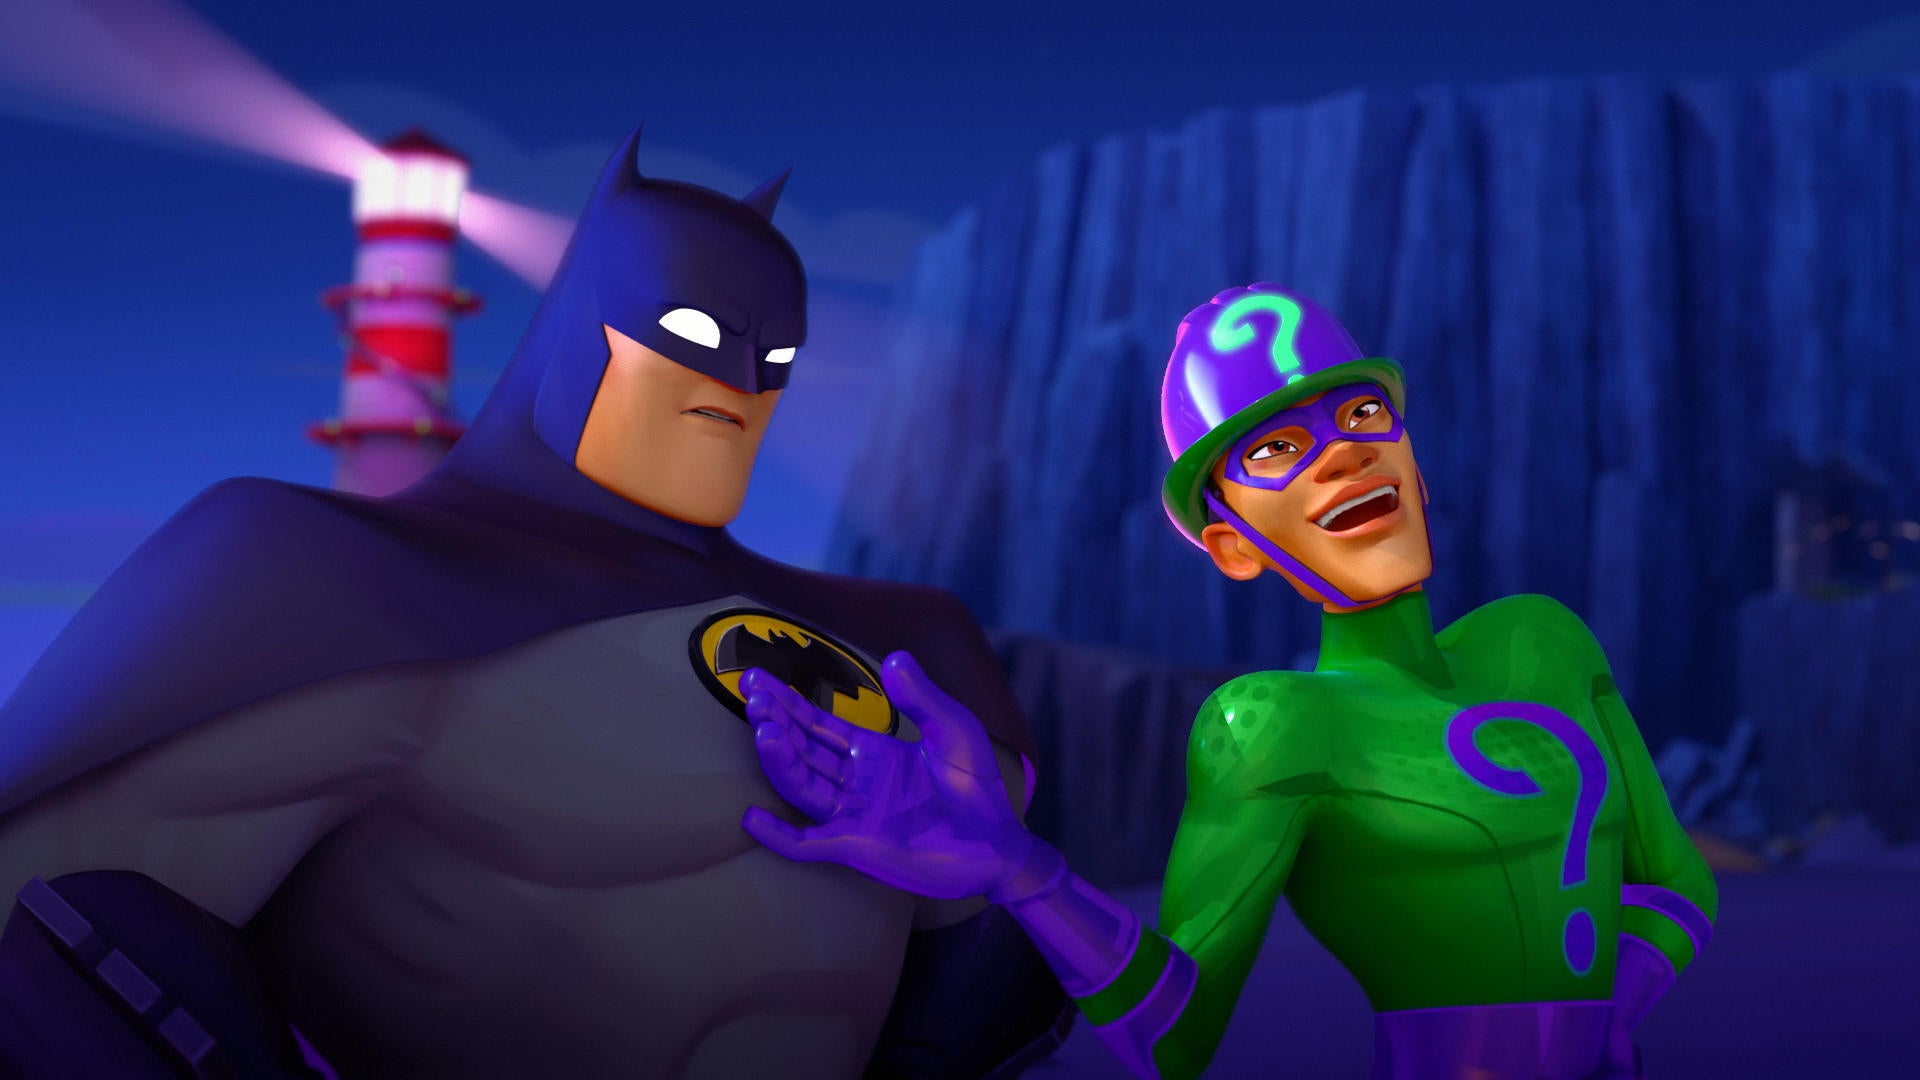 DC Releases Poster For Batwheels Animated Series